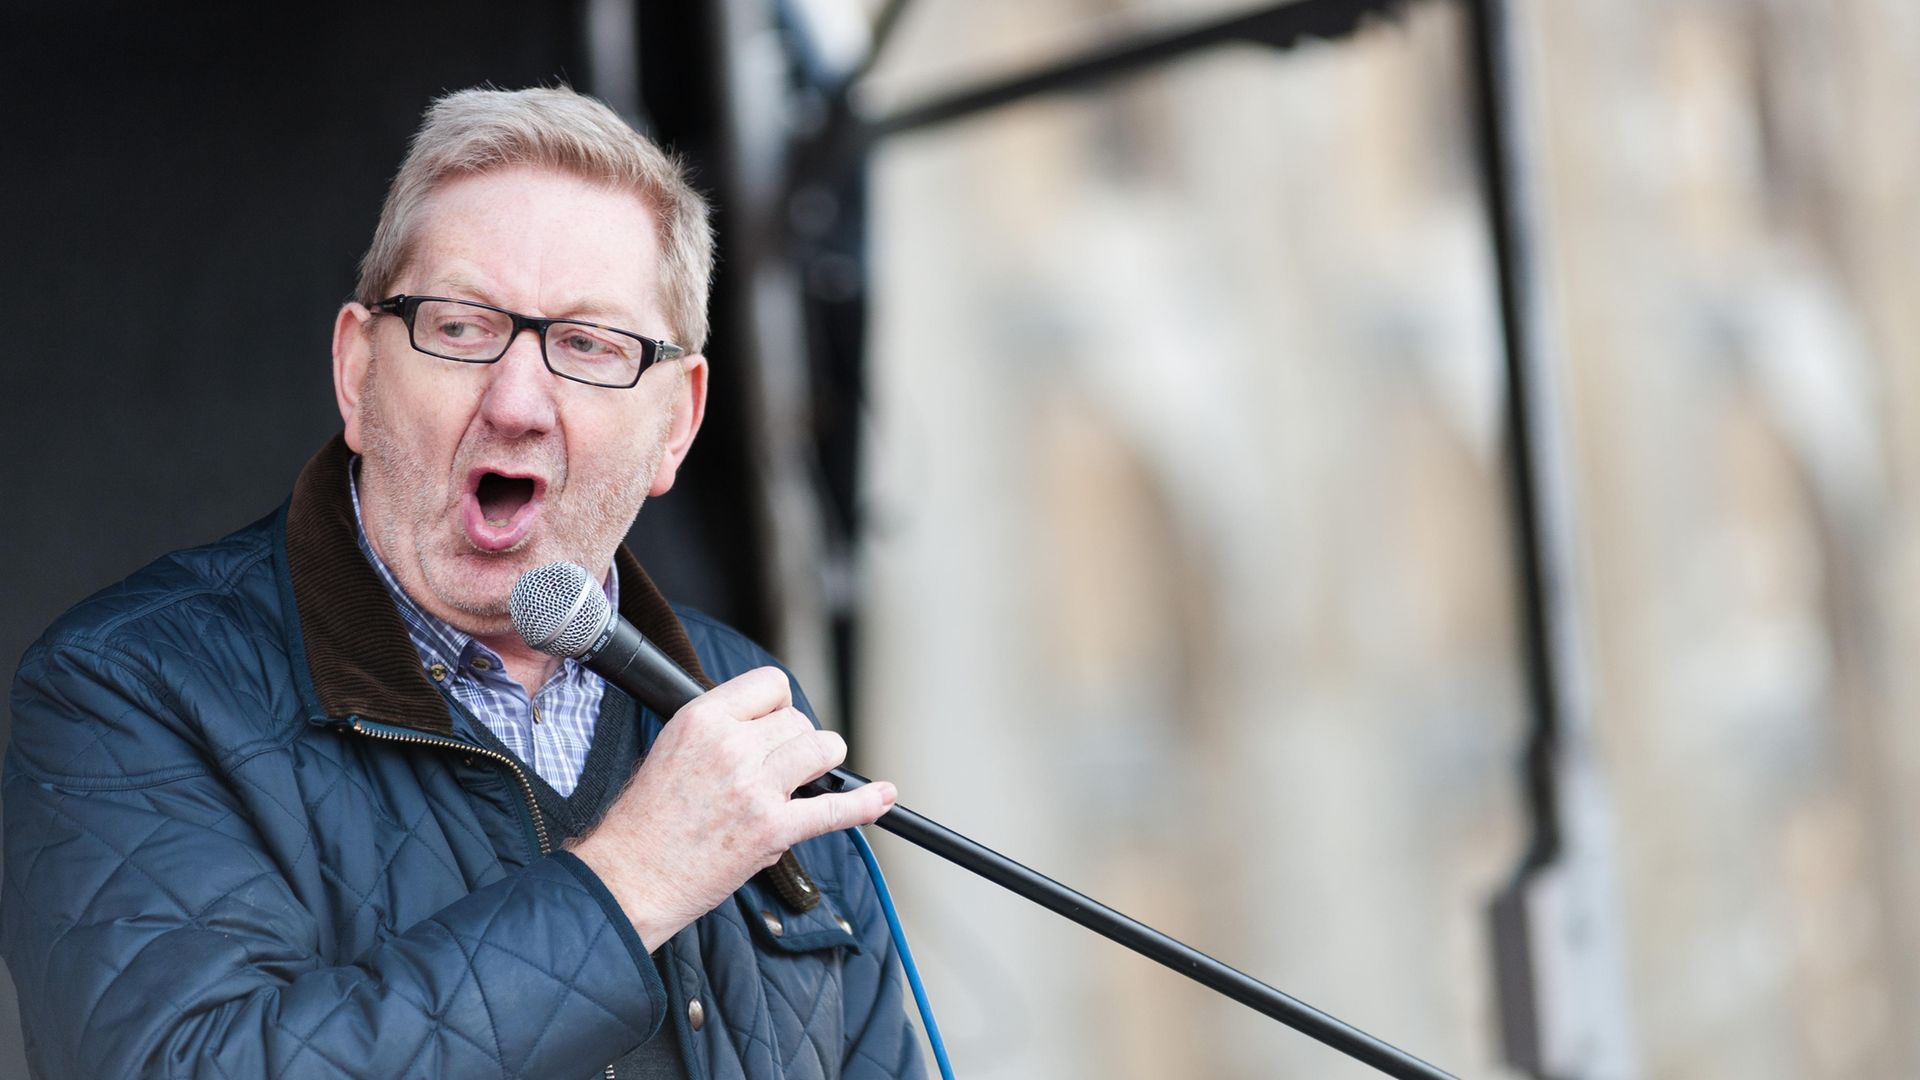 Len McCluskey at a 2017 demonstration about the state of the NHS - Credit: Barcroft Media via Getty Images